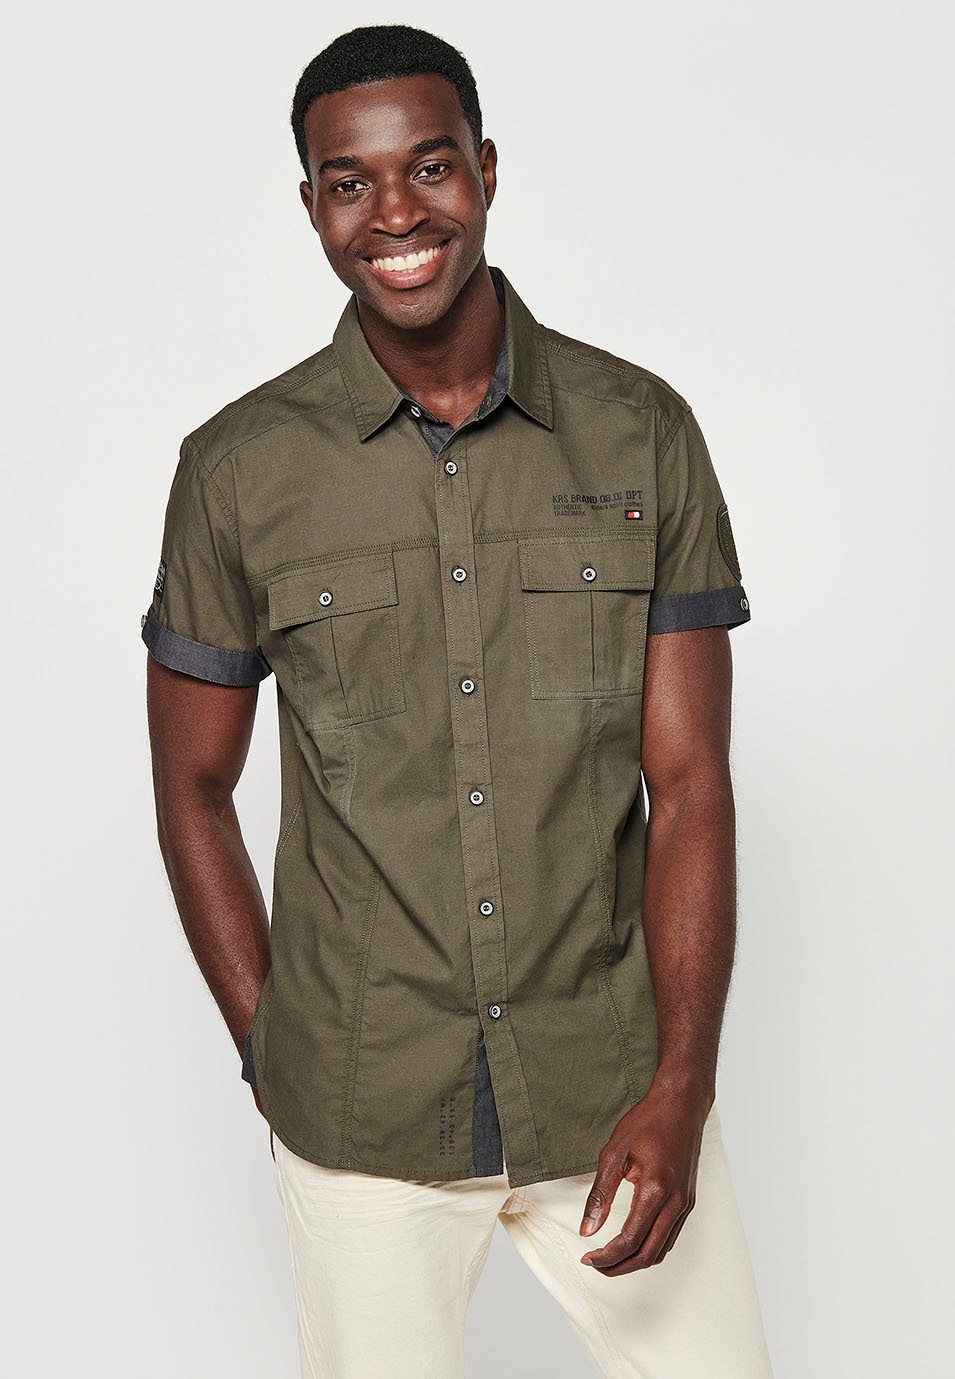 Short Sleeve Cotton Shirt with Button Front Closure and Front Flap Pockets in Olive Color for Men